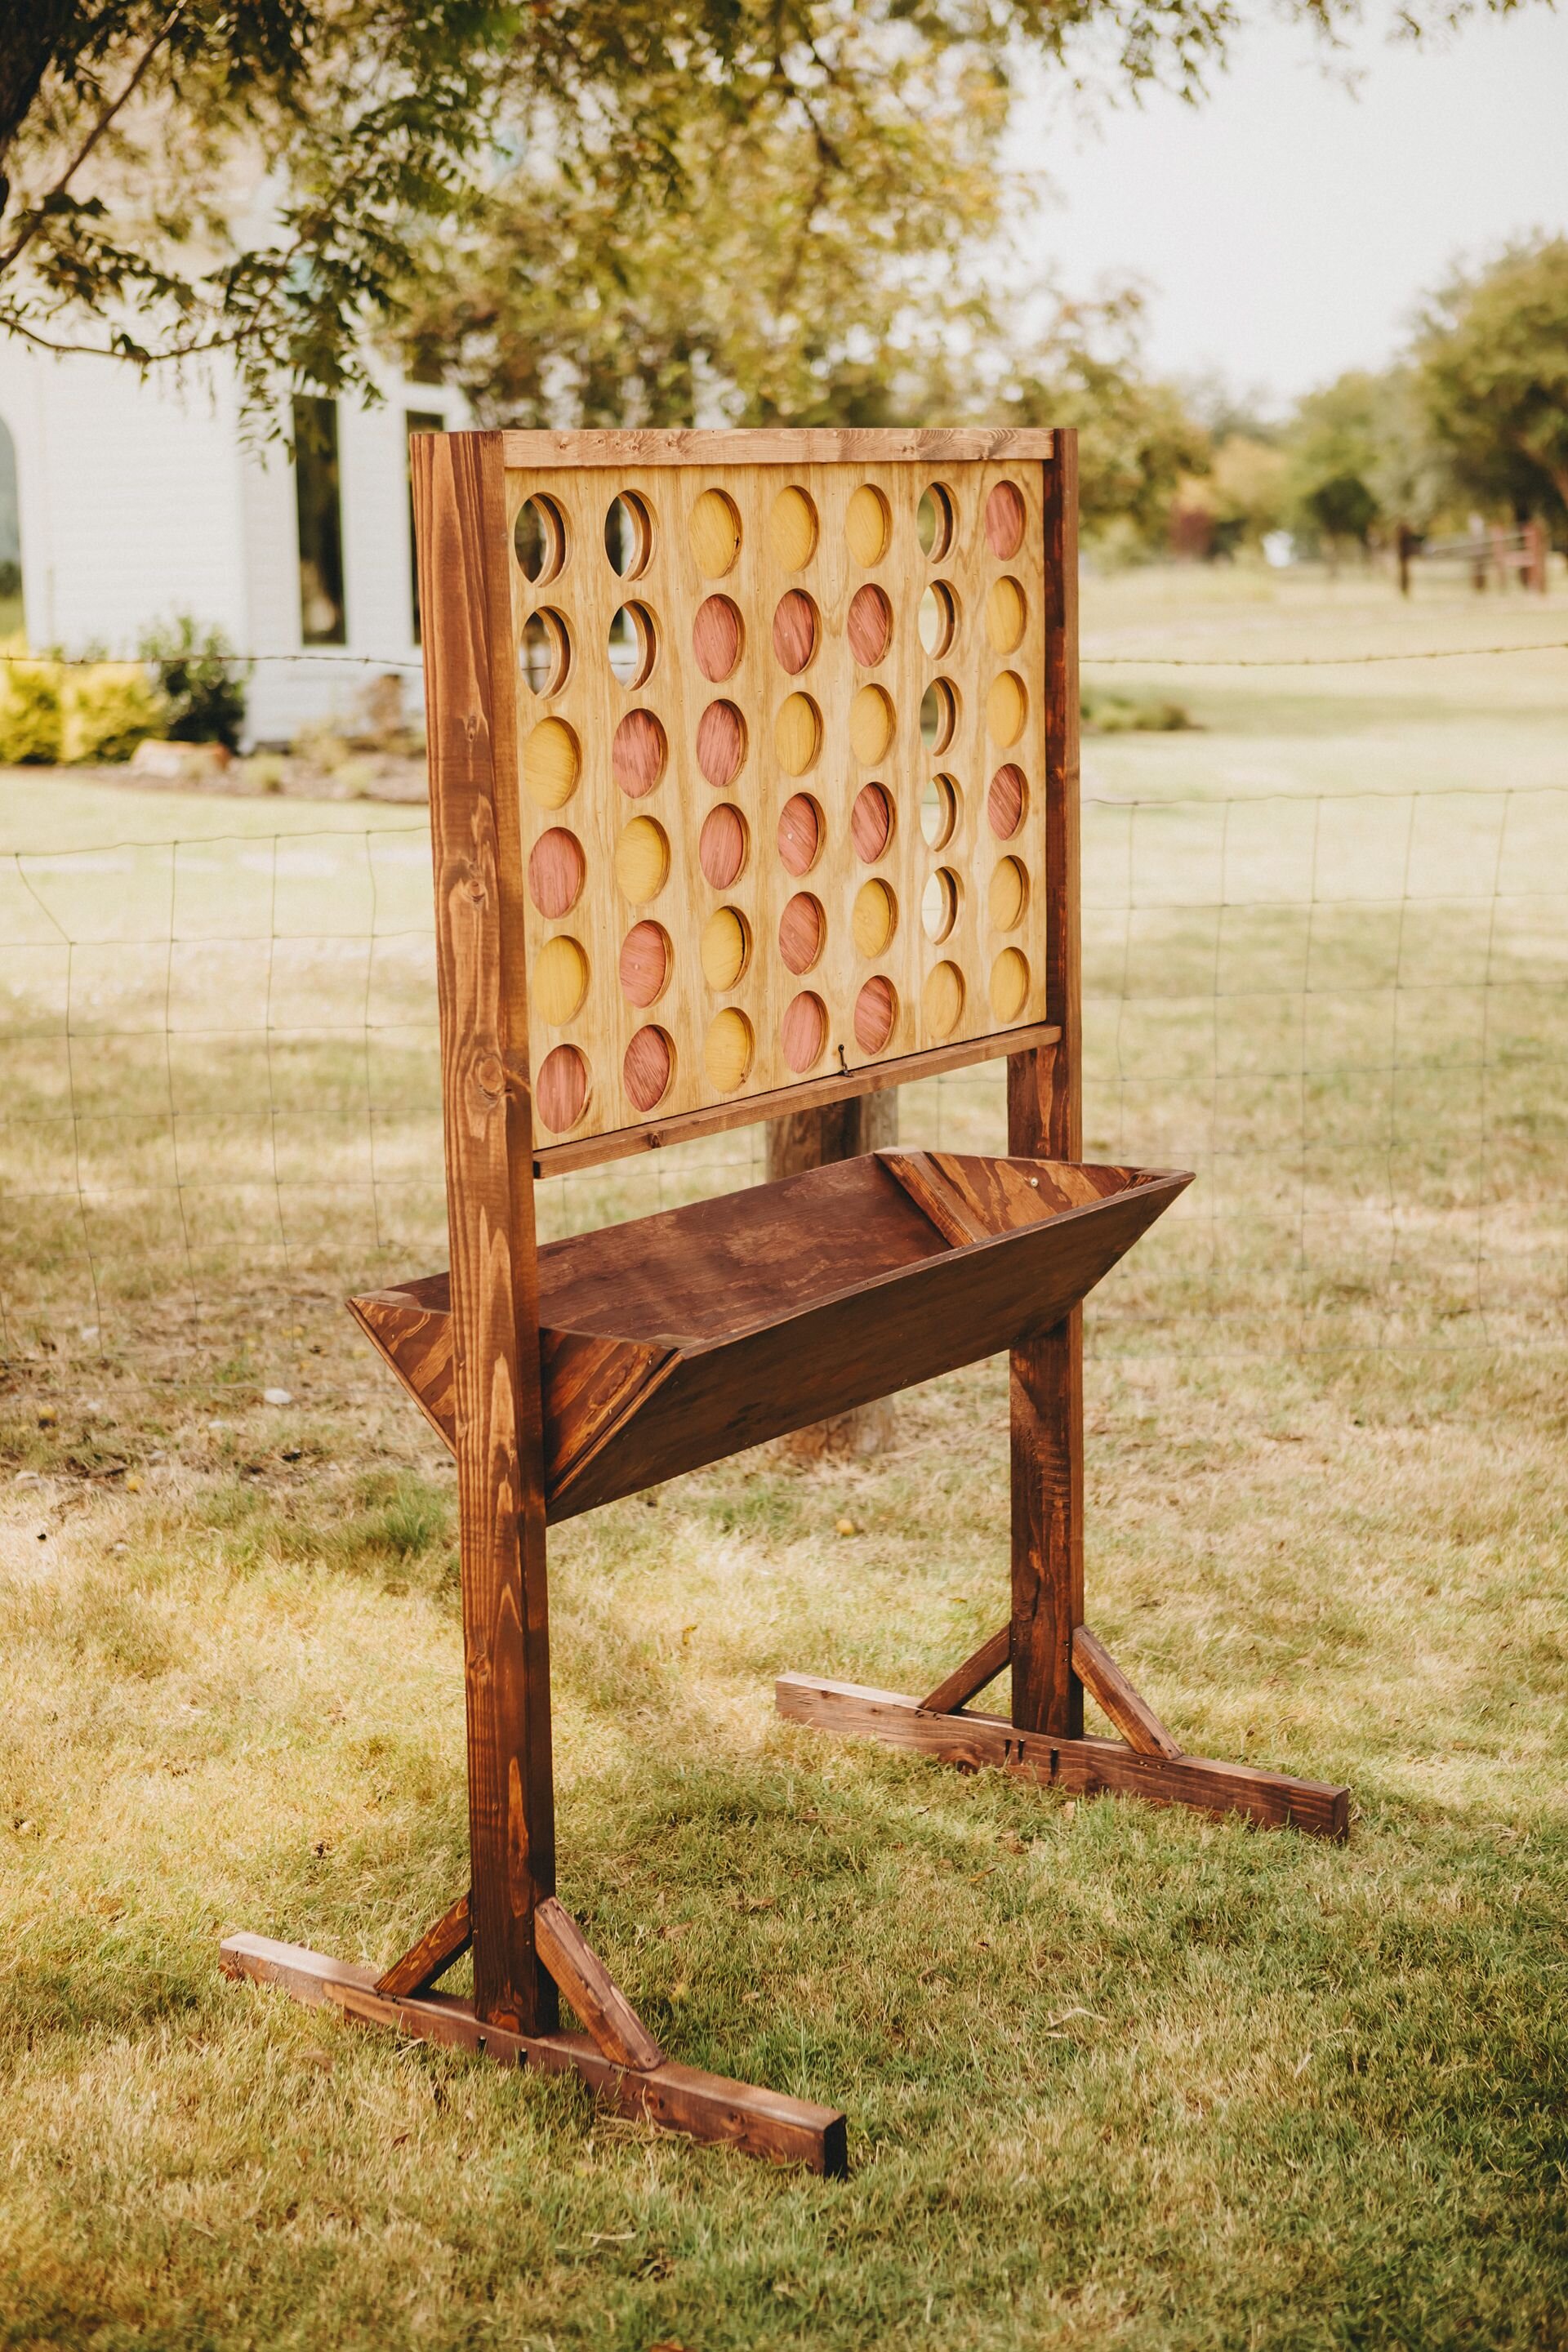 Giant connect four, wedding lawn games  Rustic Grace Estate, Van Alstyne, TX  Photocred_ Two Pair Photography.jpg